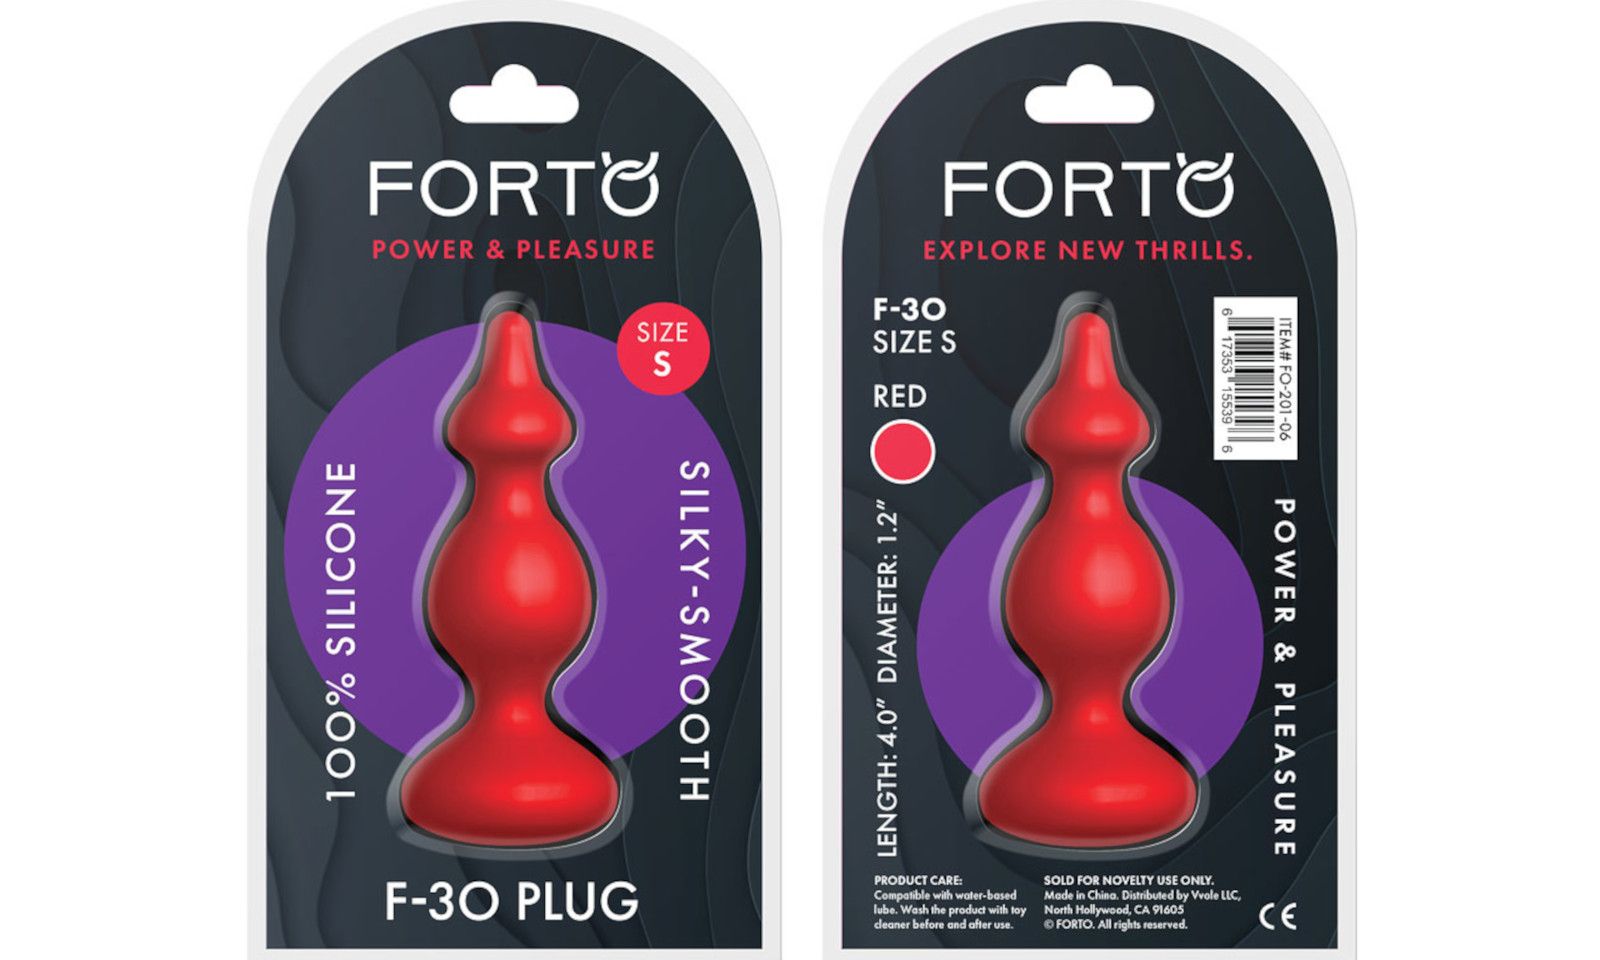 Entrenue Is Now Shipping Forto Products for Men